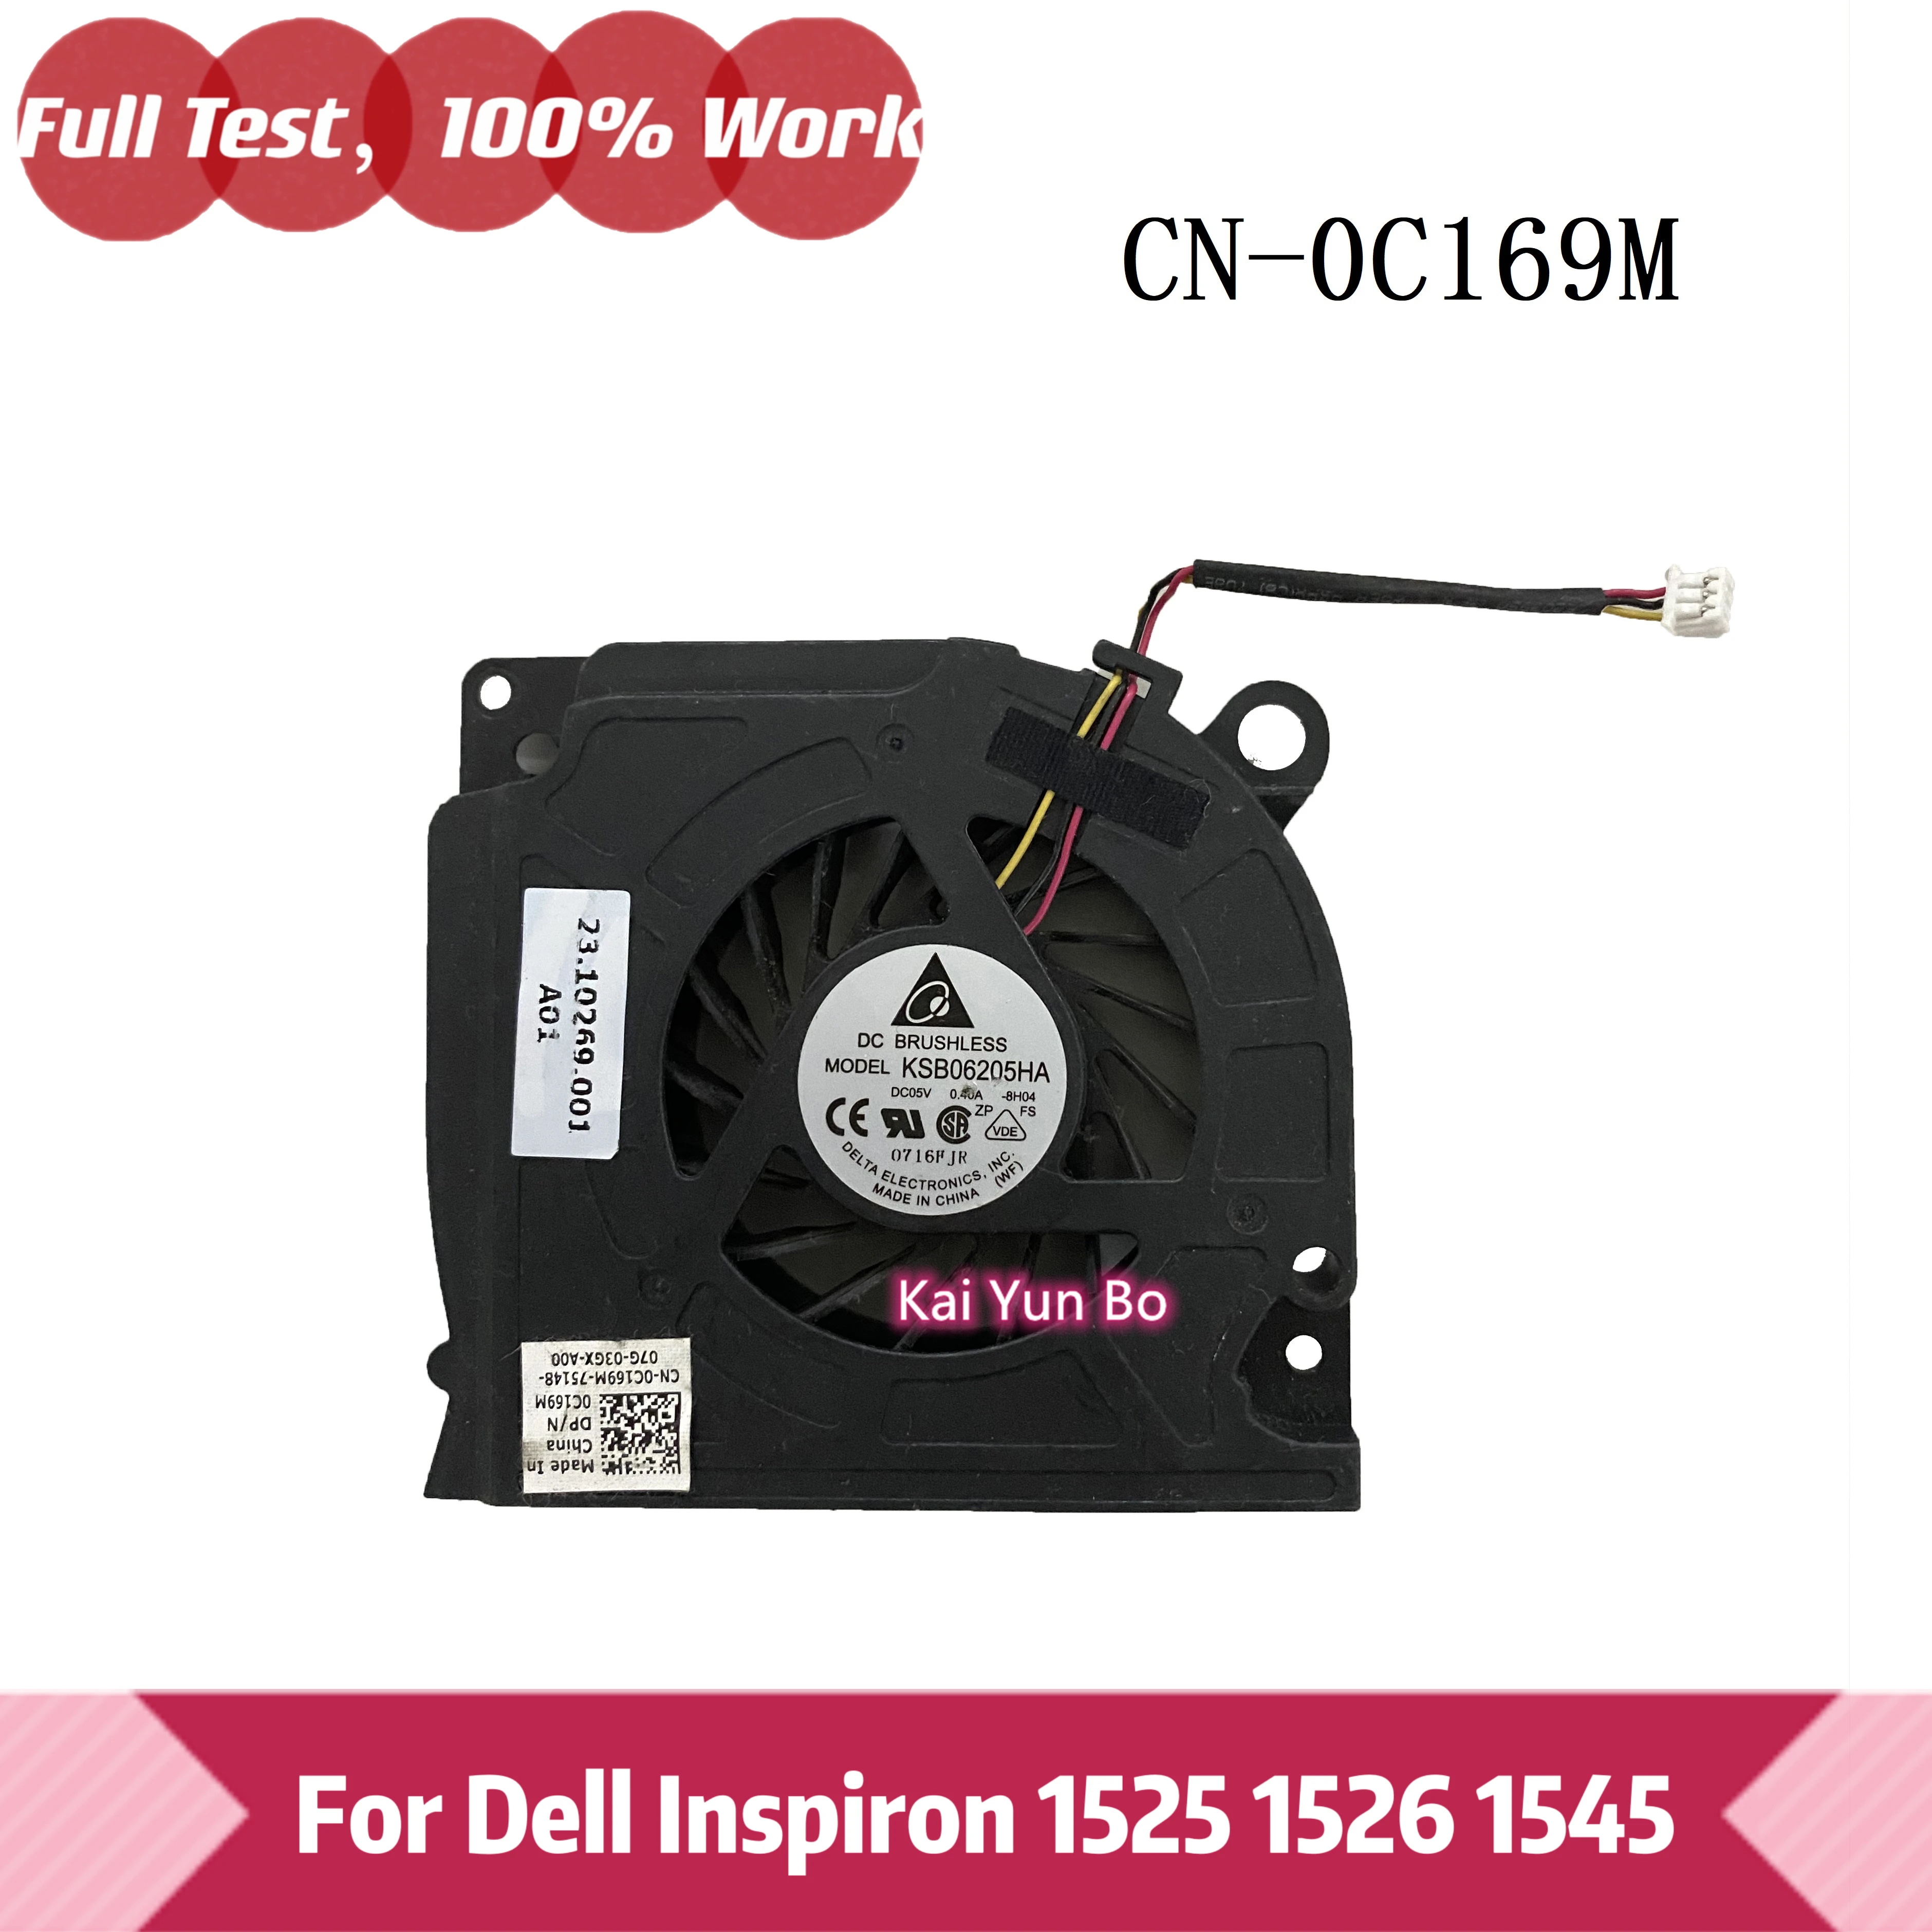 Laptop CPU Cooling Fan For Dell Inspiron 1525 1526 1545 Part Numbers 23.10269.001 KSB06205HA C169M CN-0C169M 0C169M